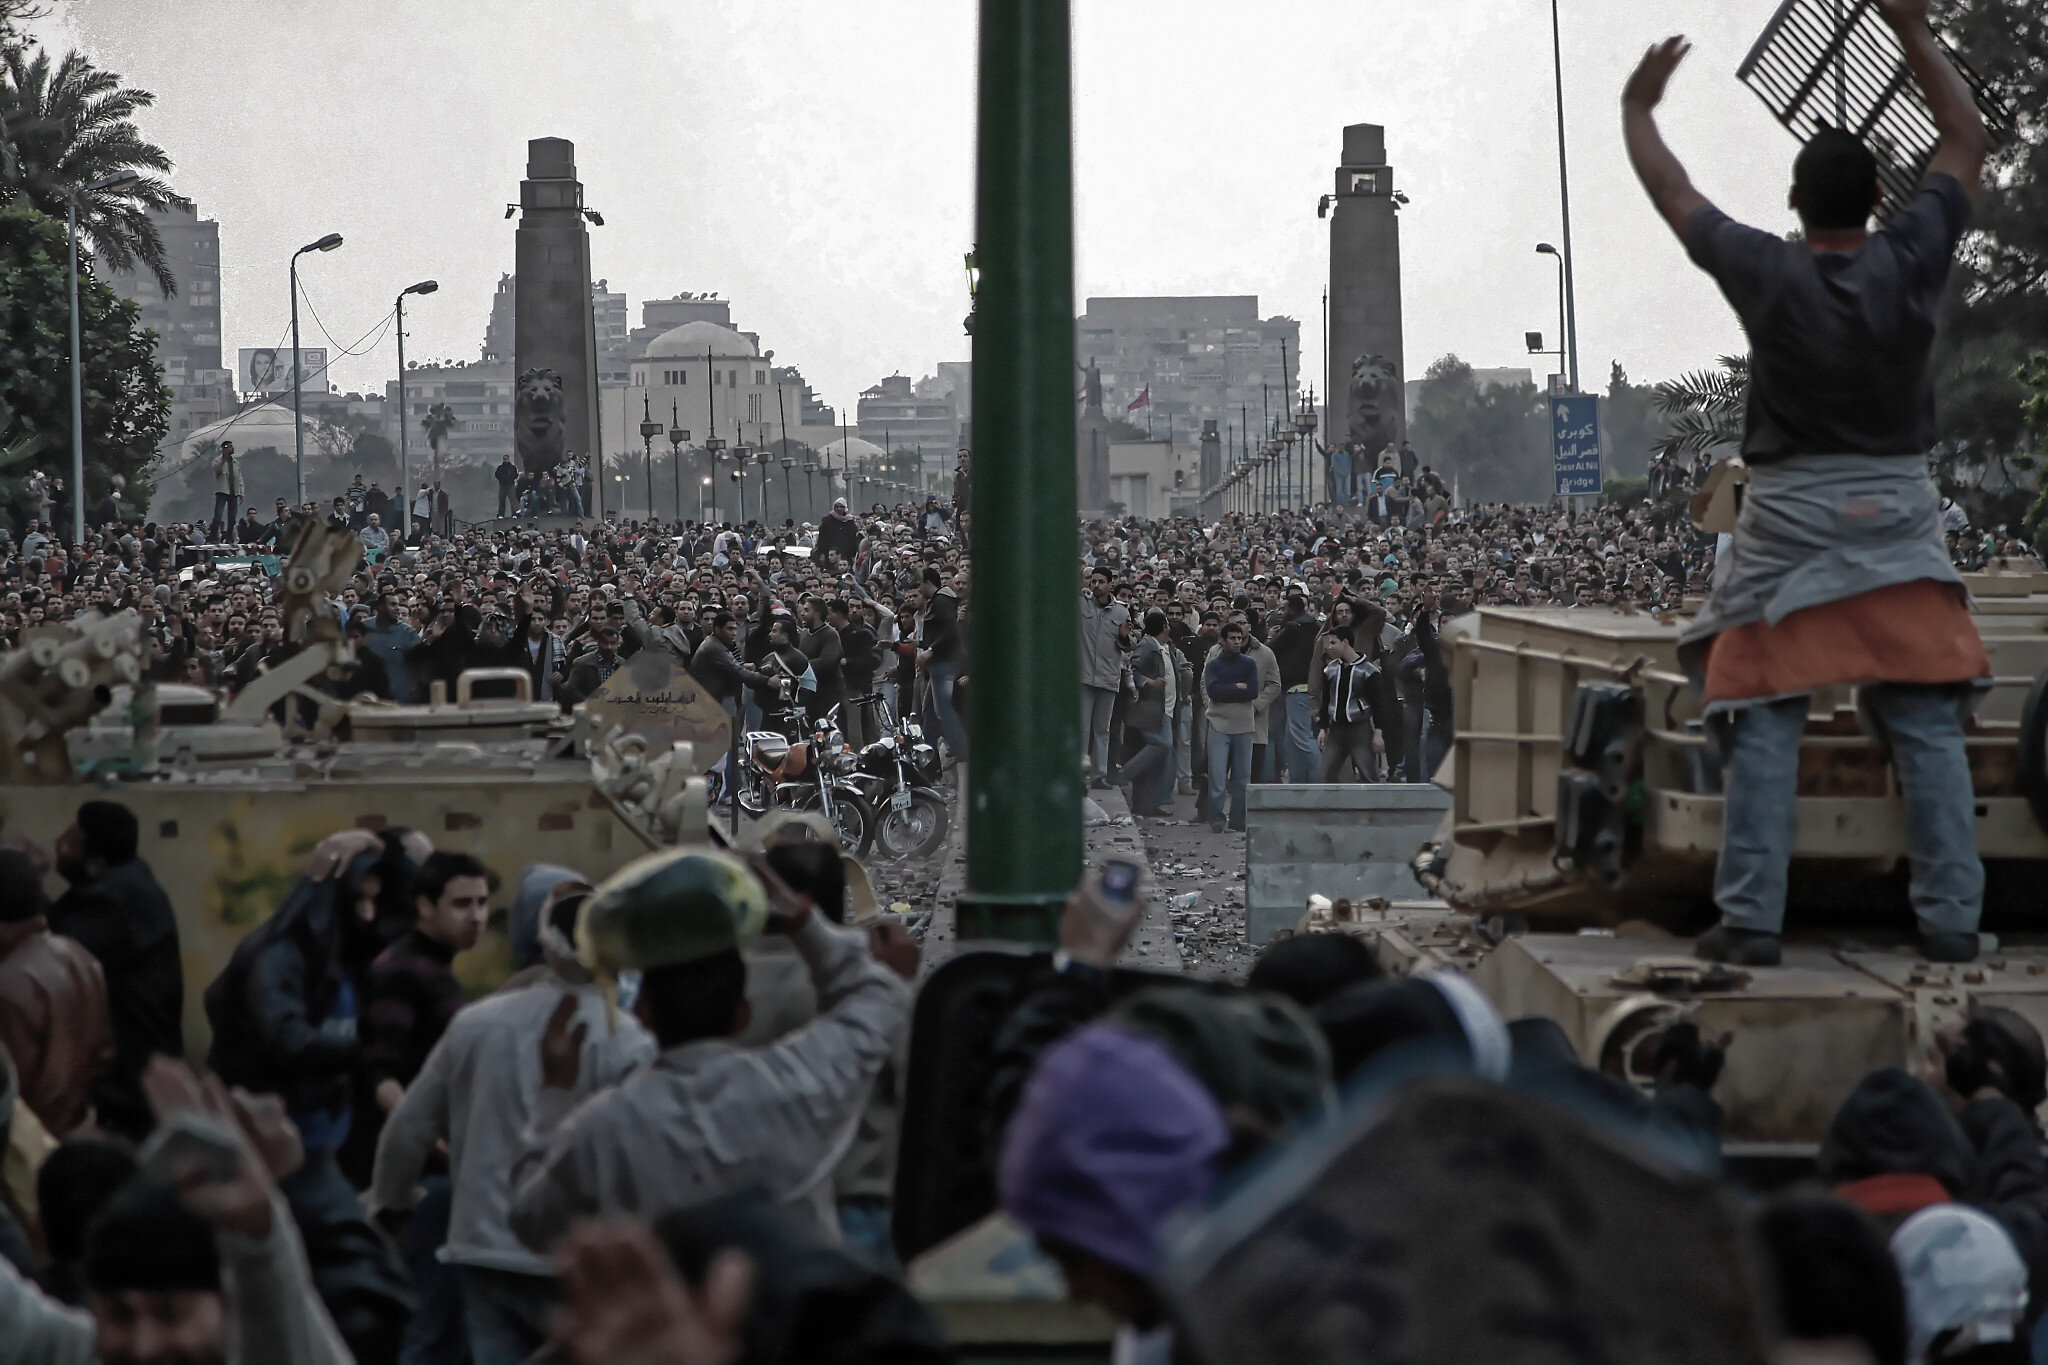 Defenders of Tahrir Square take cover behind tanks as pro-Mubarak supporters launch stones against them at the square's Qasr el-Nil entrance  (all photos courtesy Iason Athanasiadis)